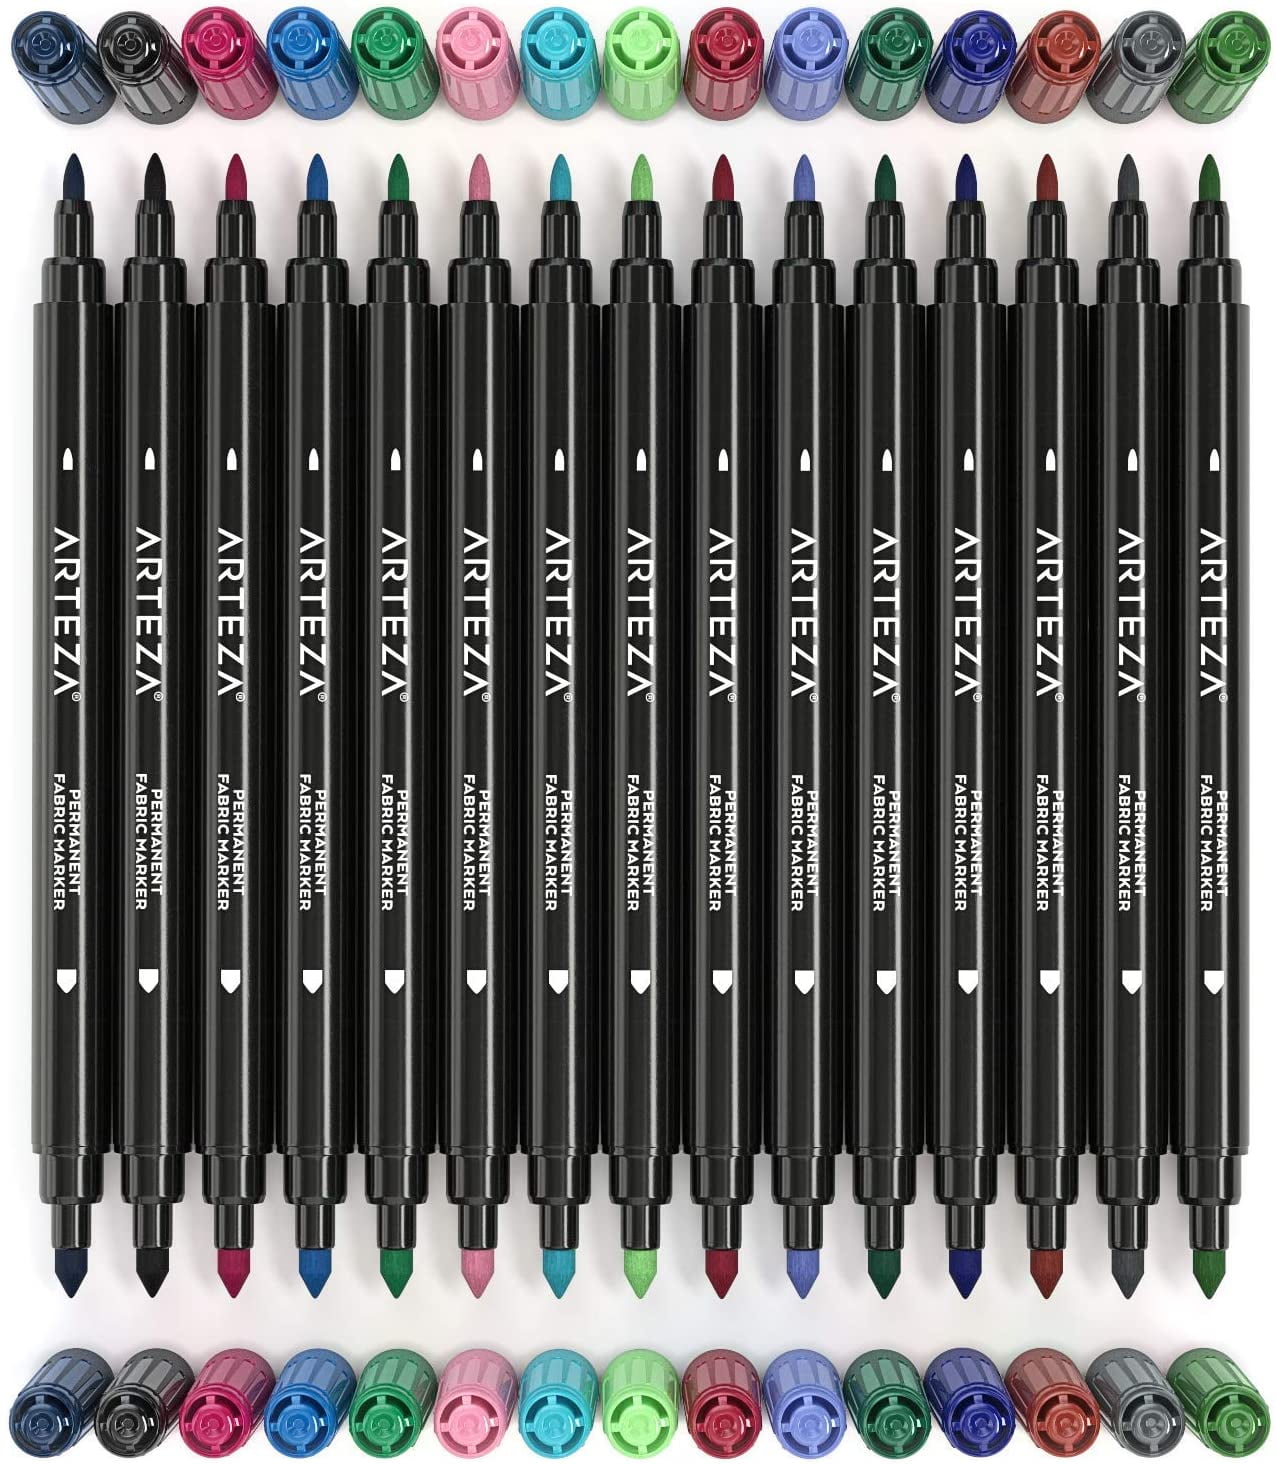 Permanent Fabric Markers - 12 colors in 1 set – MadamSew